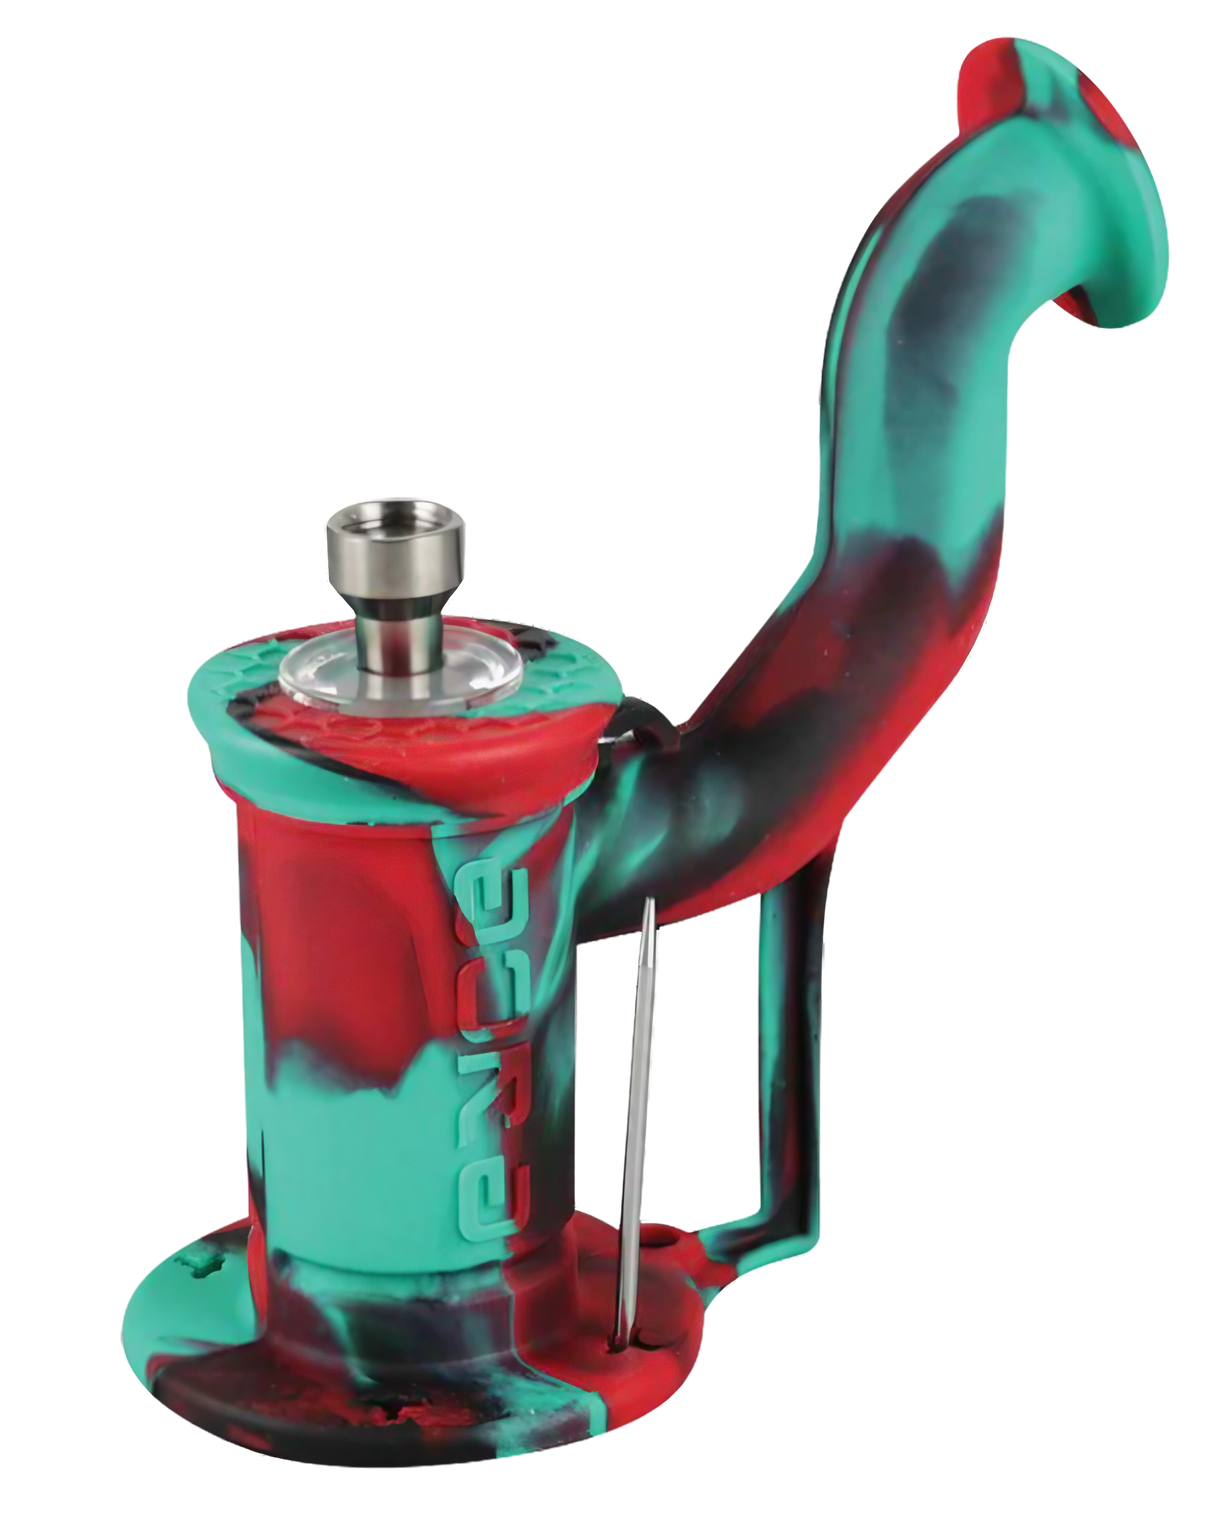 Eyce Oil Rig 2.0 silicone dab rig in assorted colors with steel nail, side view